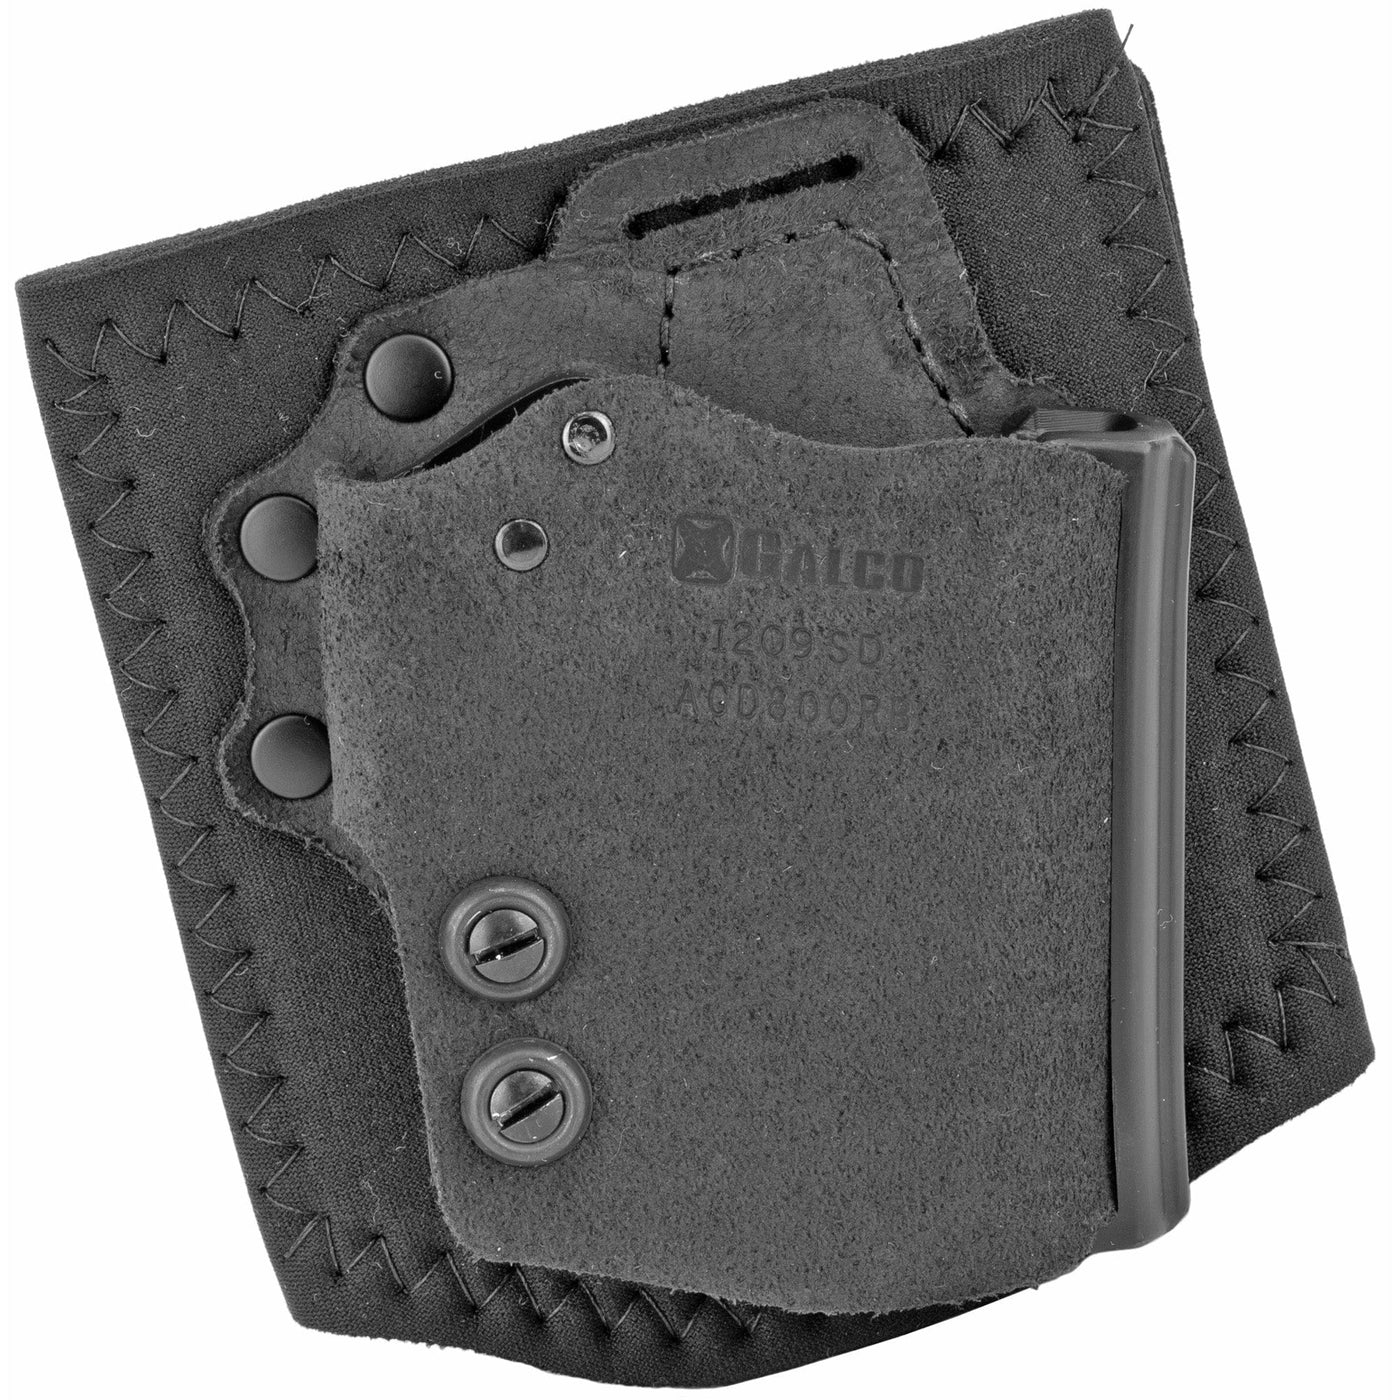 Galco Galco Ankle Guard For Glk 43 Rh Blk Holsters